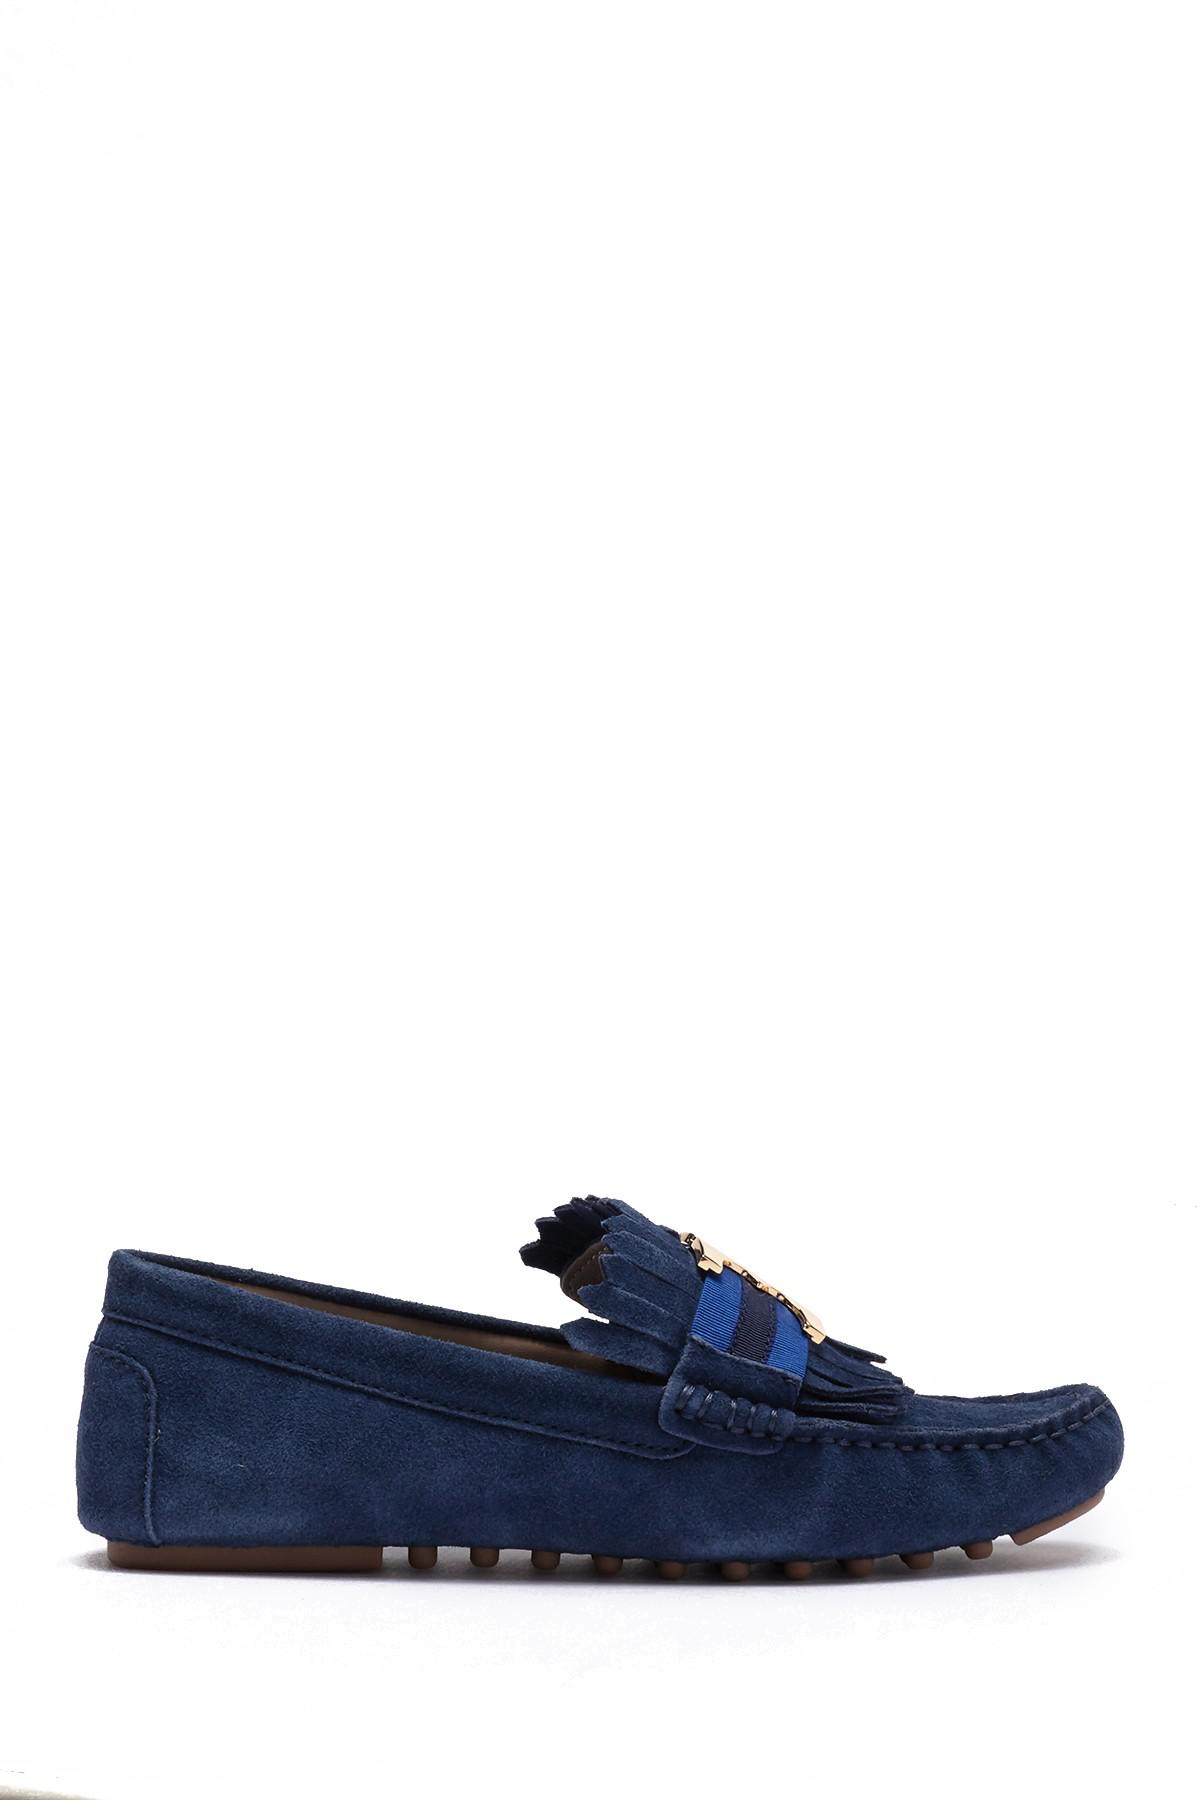 Tory Burch Suede Gemini Link Driver Loafer in Blue - Lyst